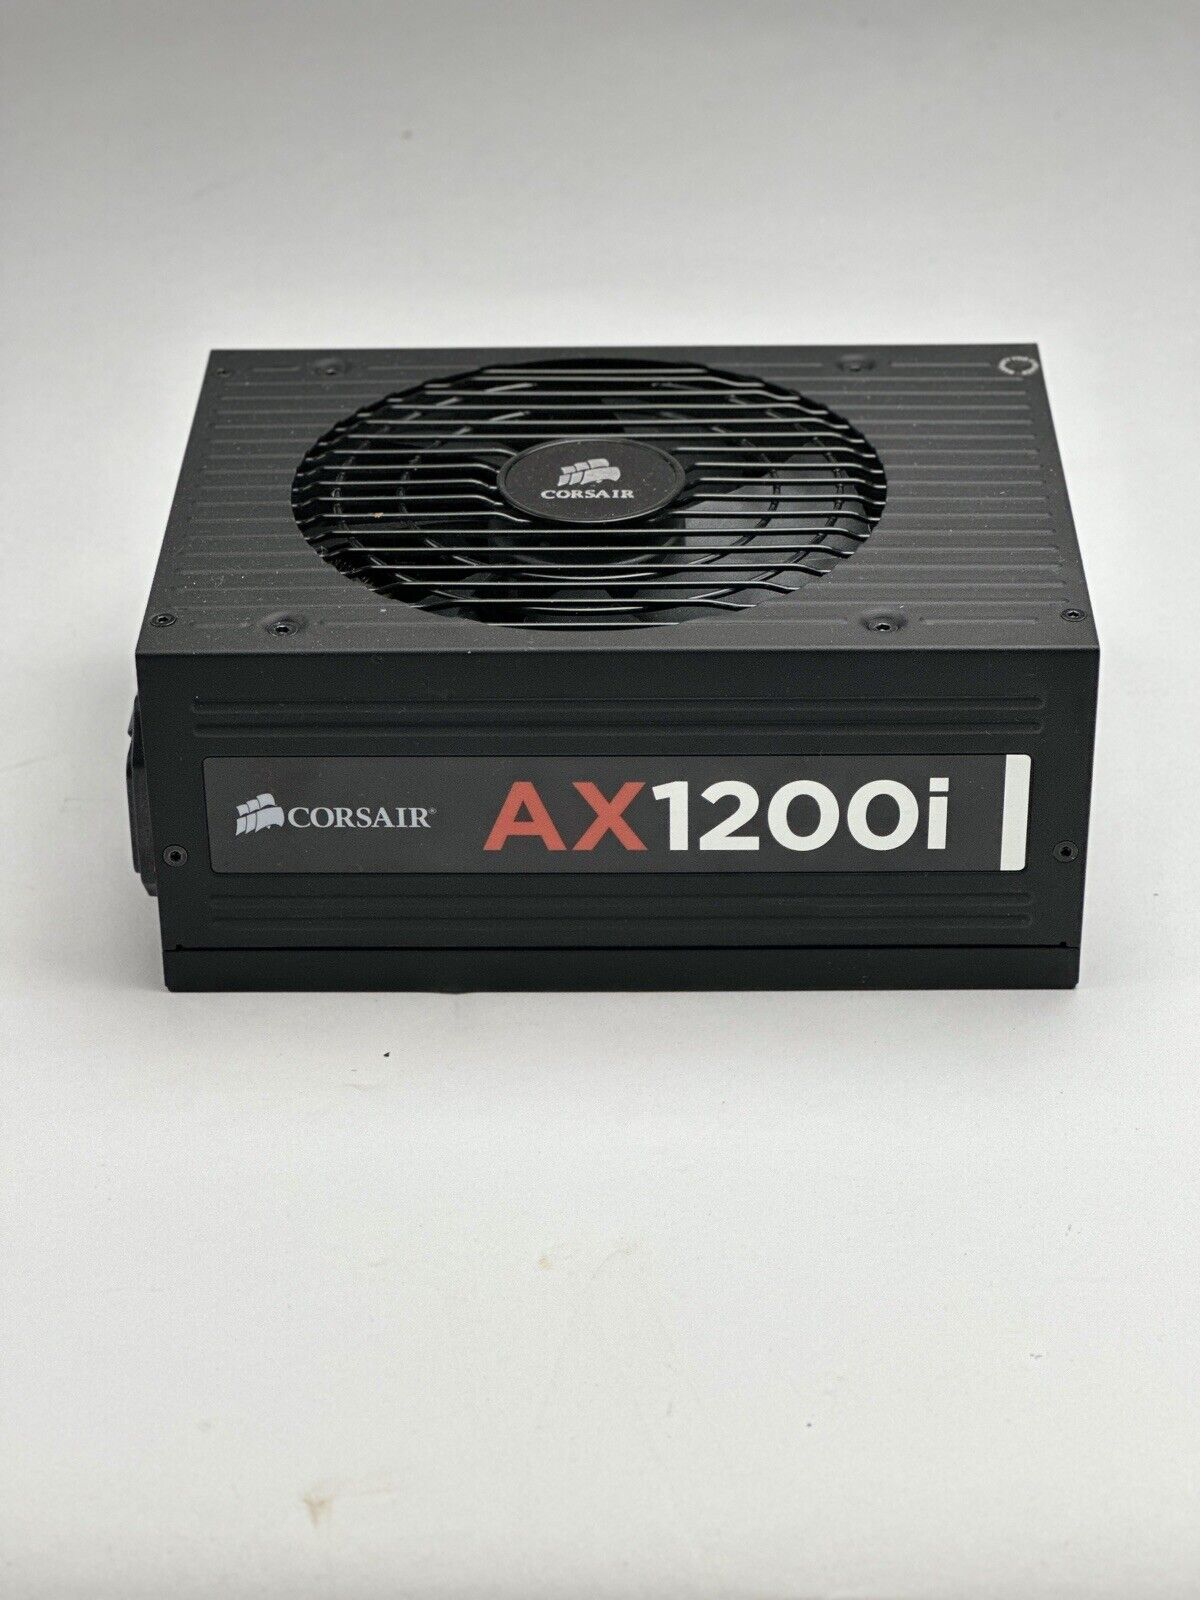 Corsair AX1200i Model 75-000784 With Cords Not Working Use For Parts Only